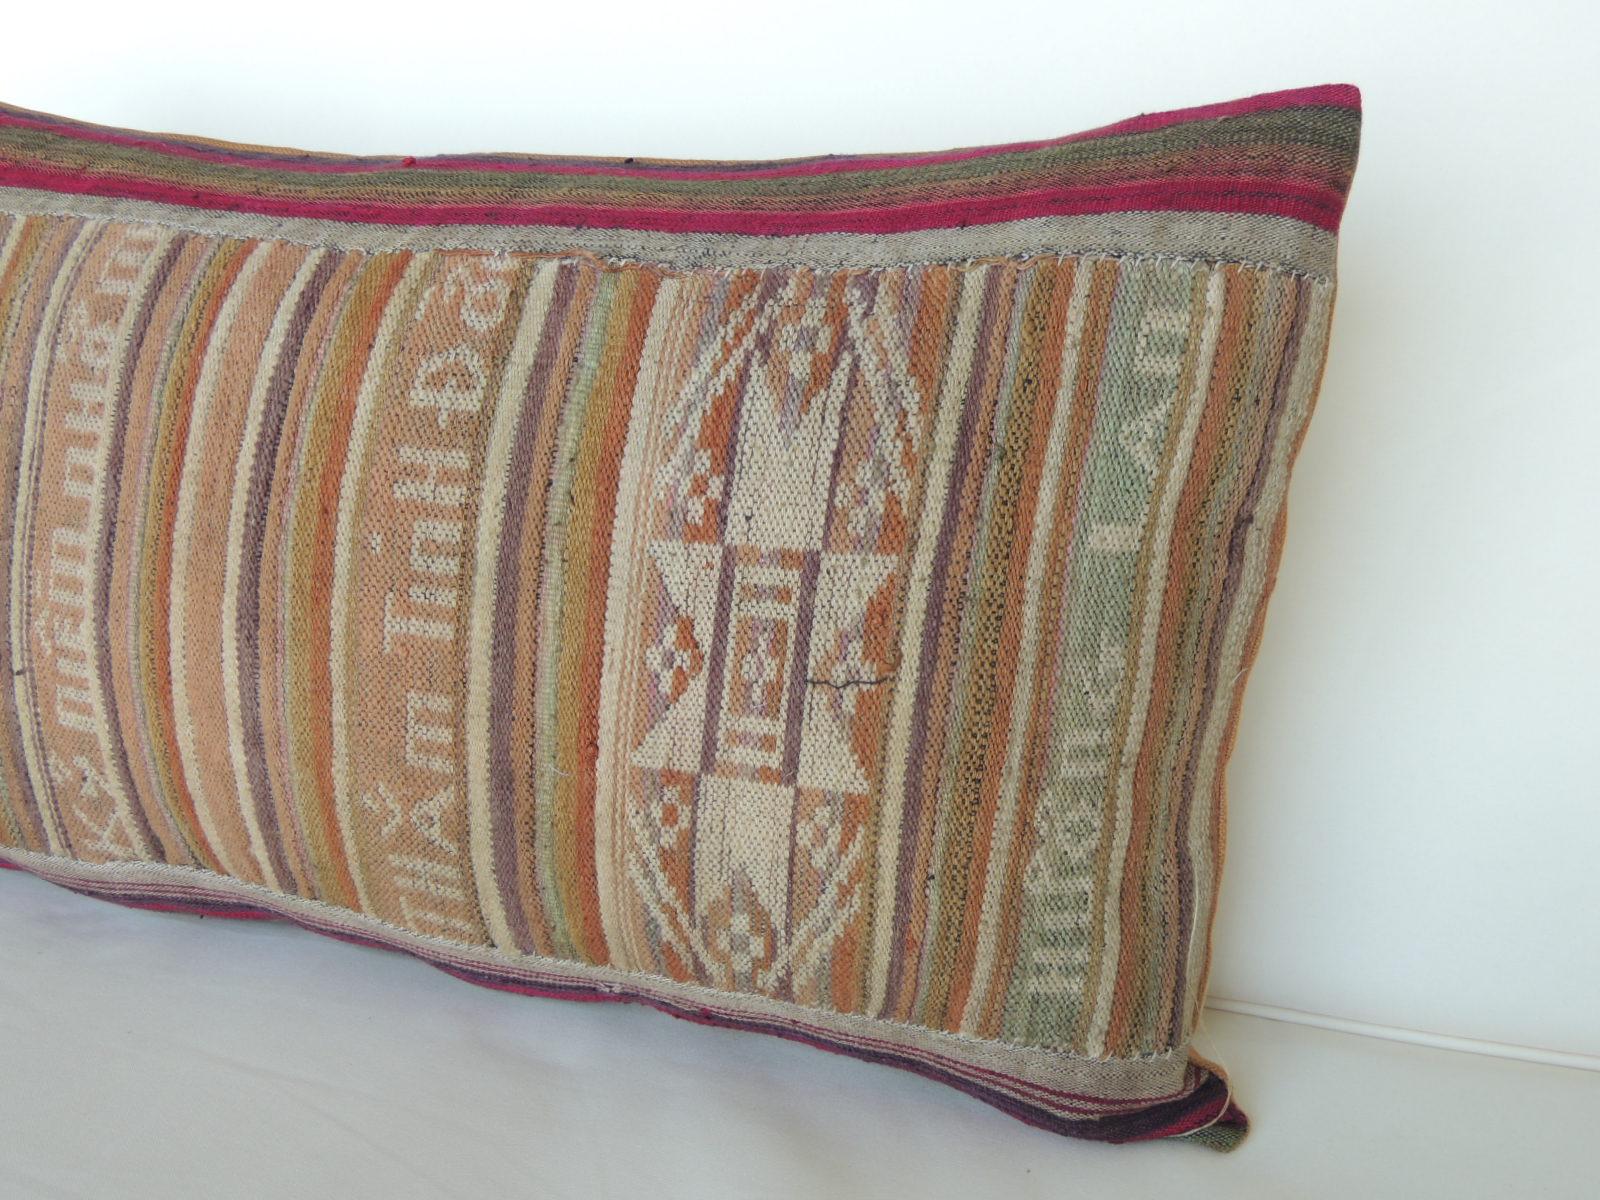 Tribal Antique Asian Red and Green Woven Stripes Decorative Lumbar Pillow